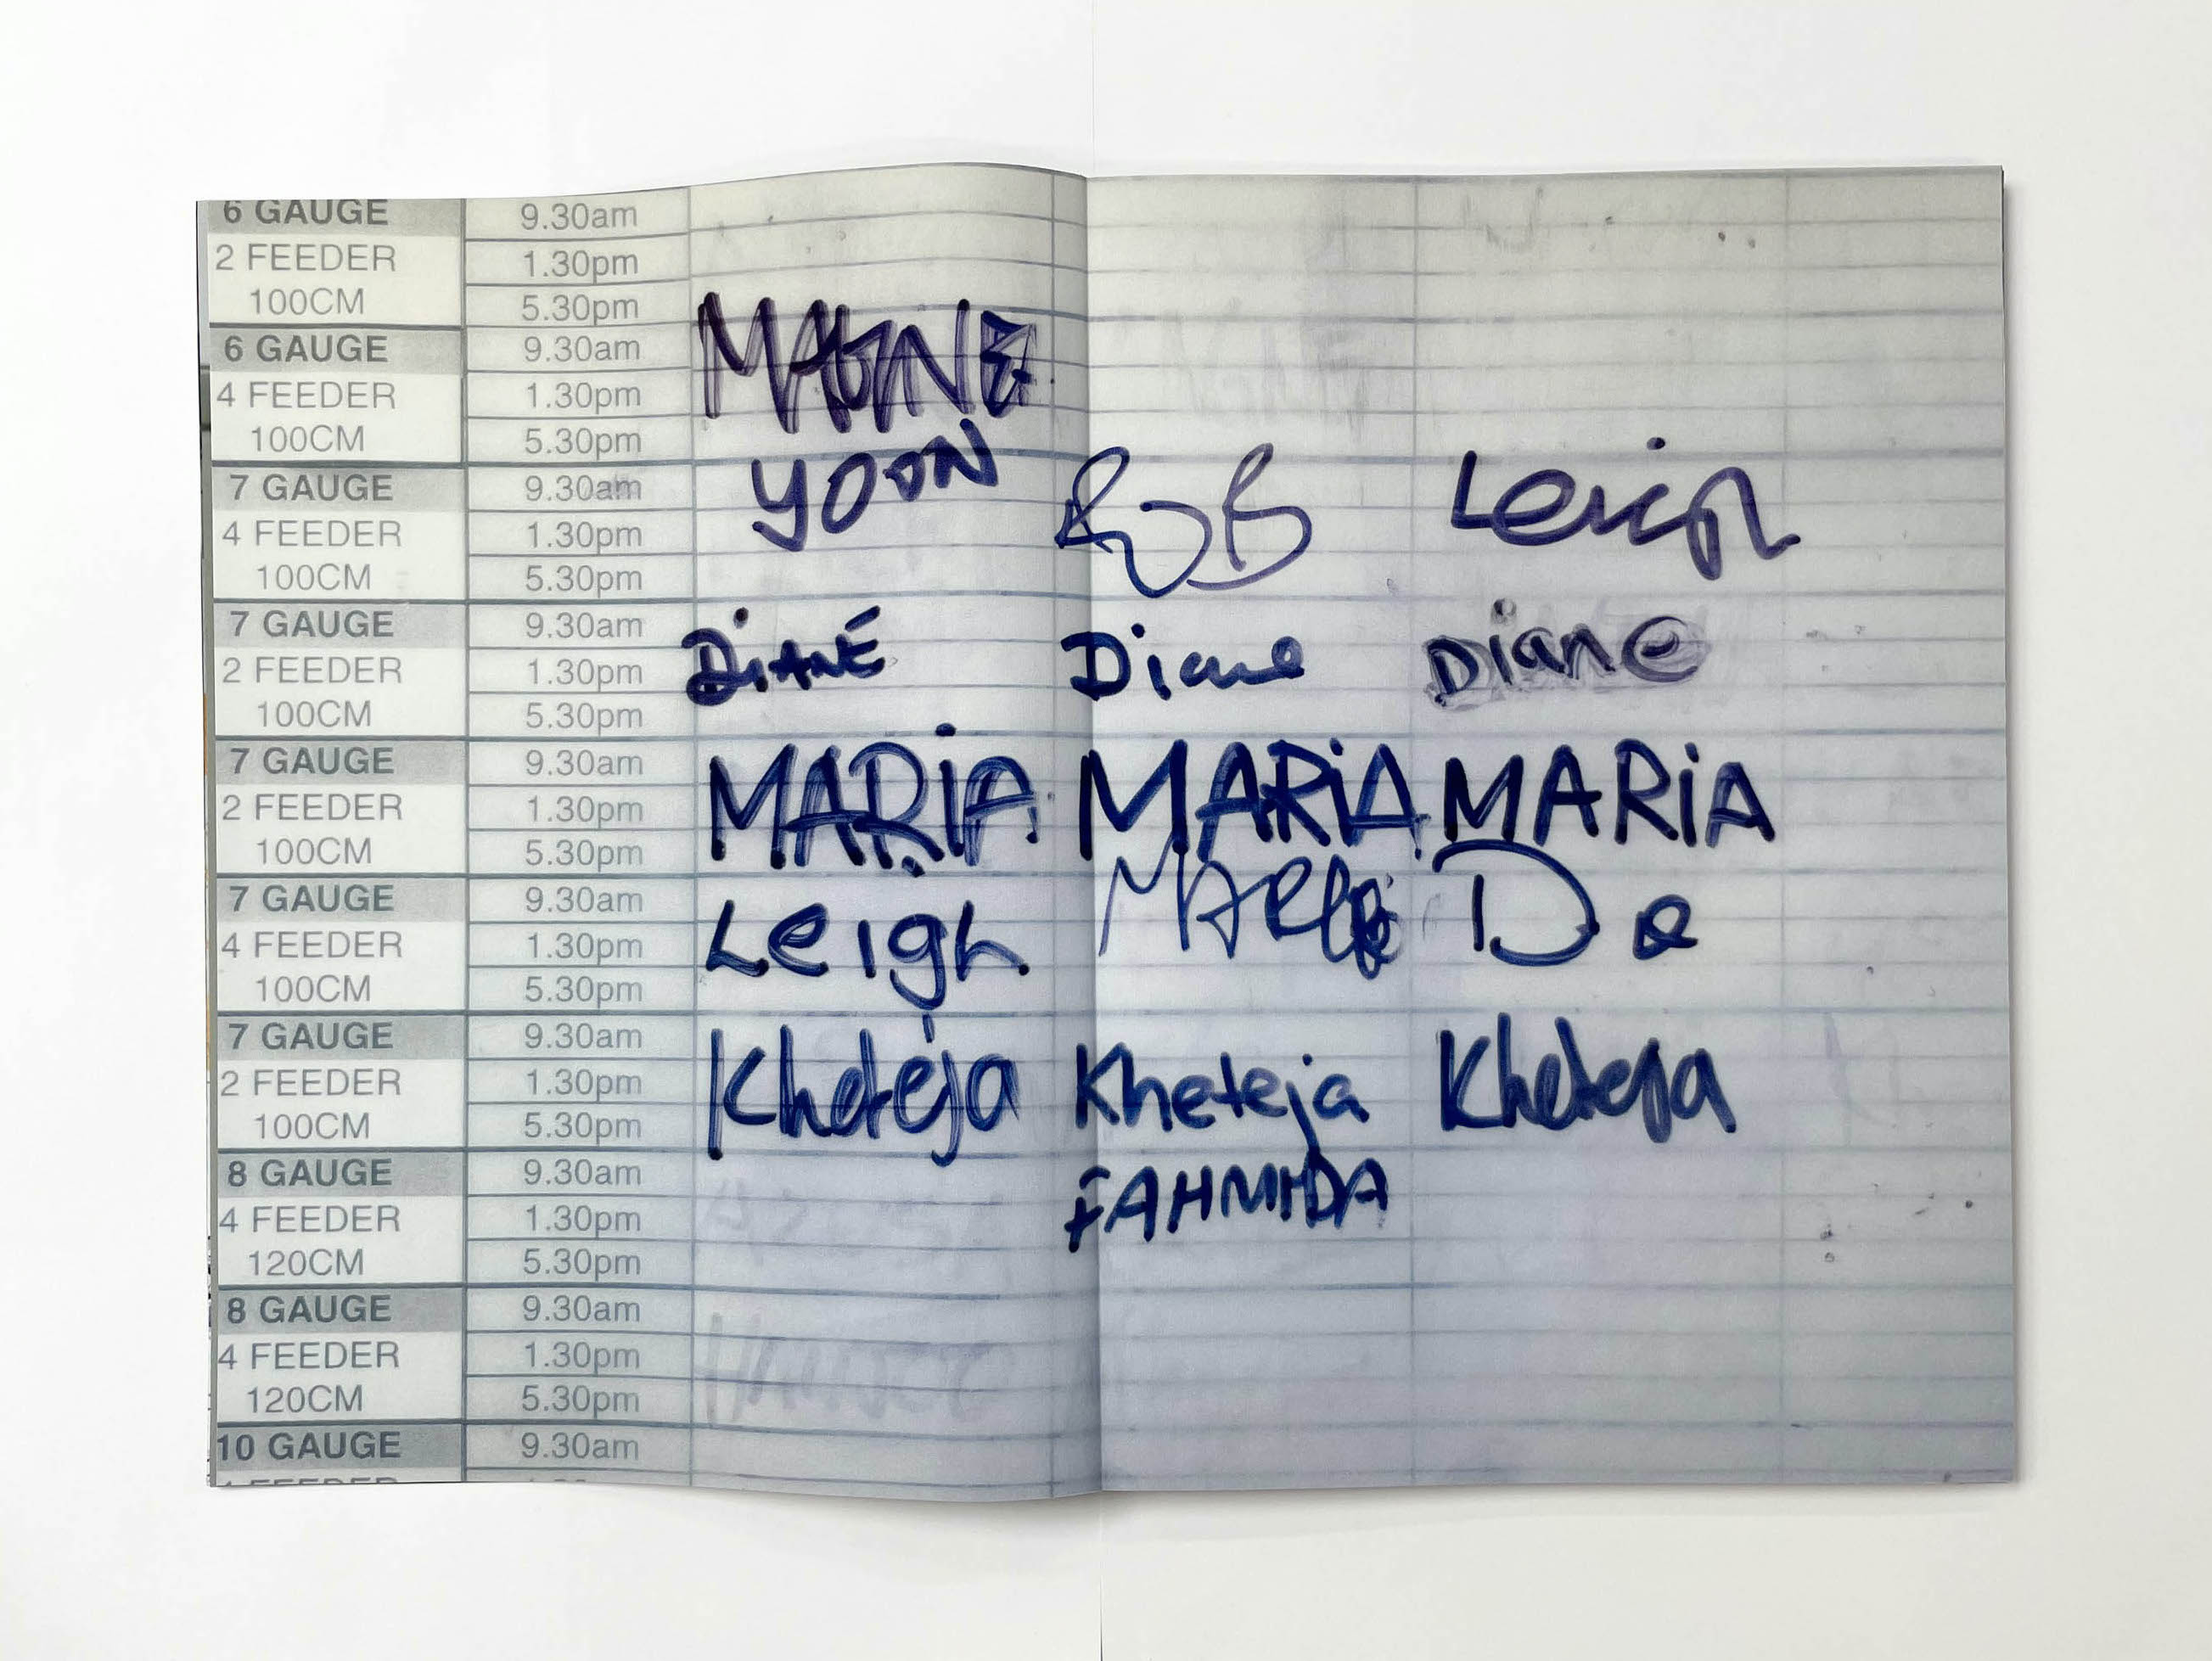 a printed schedule lays out specified times, in the grid names are written in black felt tip pen - Yoon, Bob, Diane and Khaleja